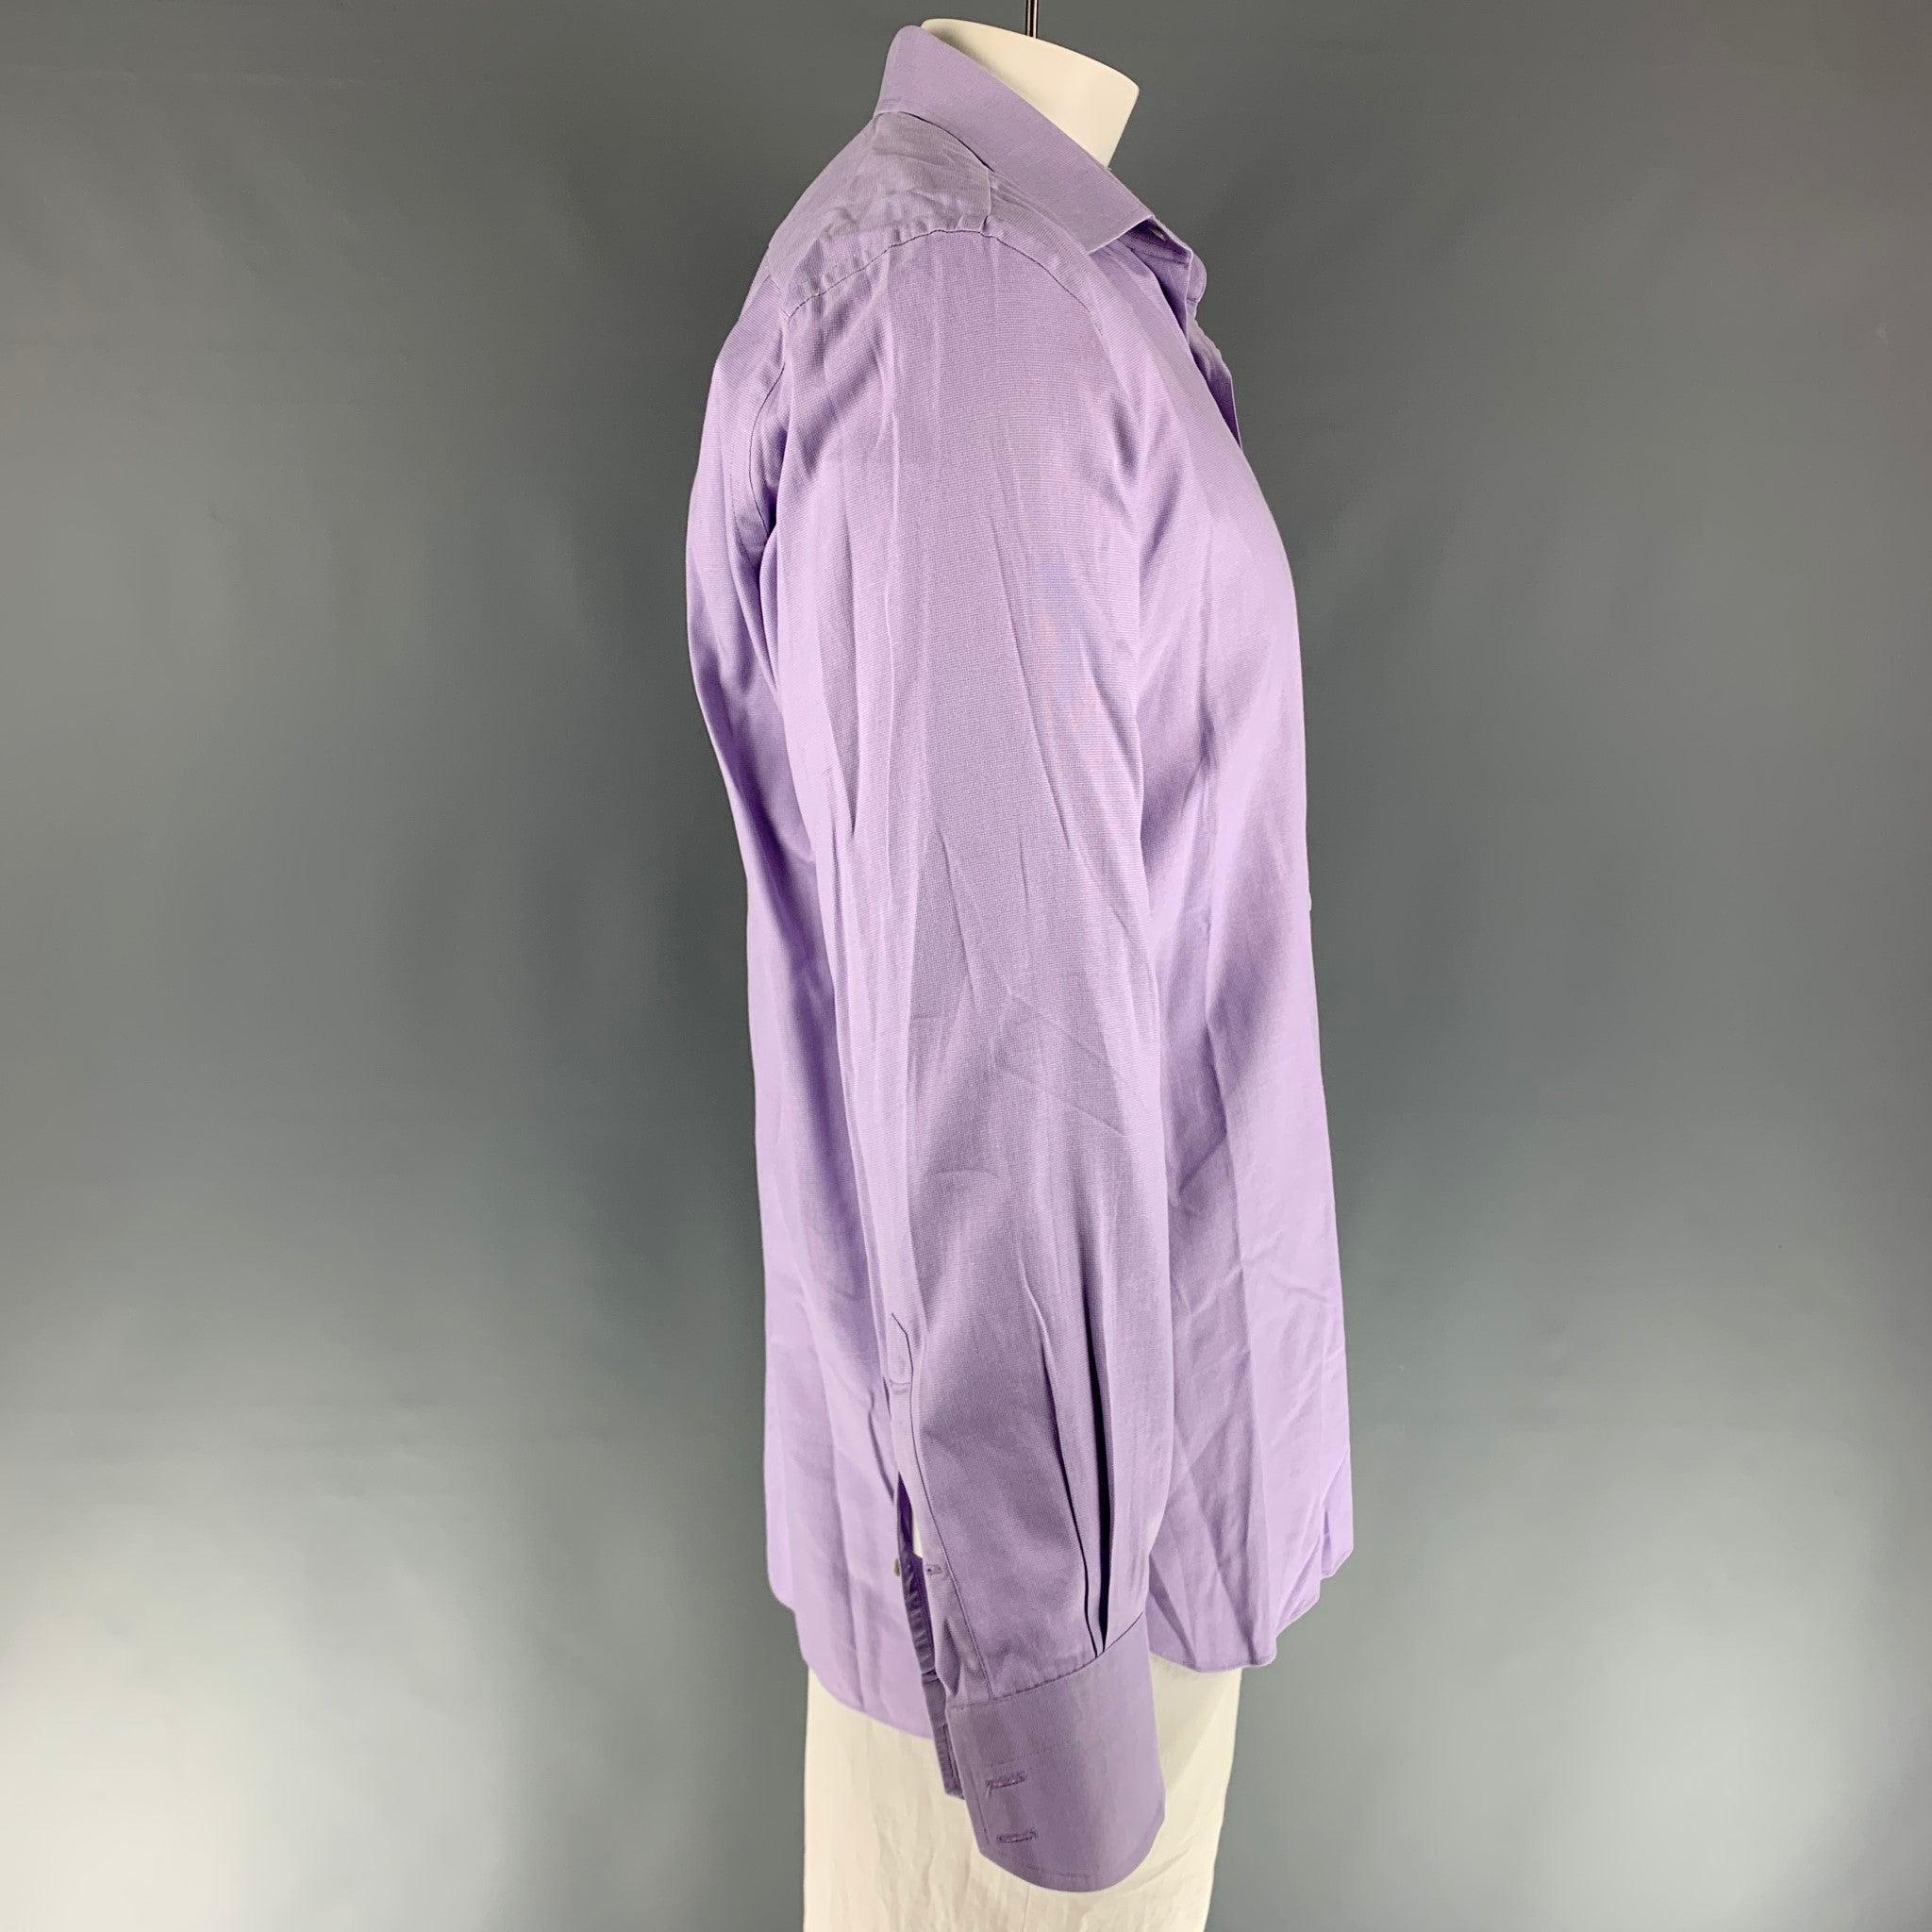 TOM FORD long sleeve button down dress shirt features a purple color and spread collar. 100% cotton.
Very Good Pre-Owned Condition. 

Marked:   43 & 17
 

Measurements: 
  
Shoulder: 19 inches Chest: 46 inches Sleeve: 26 inches Length: 31 inches